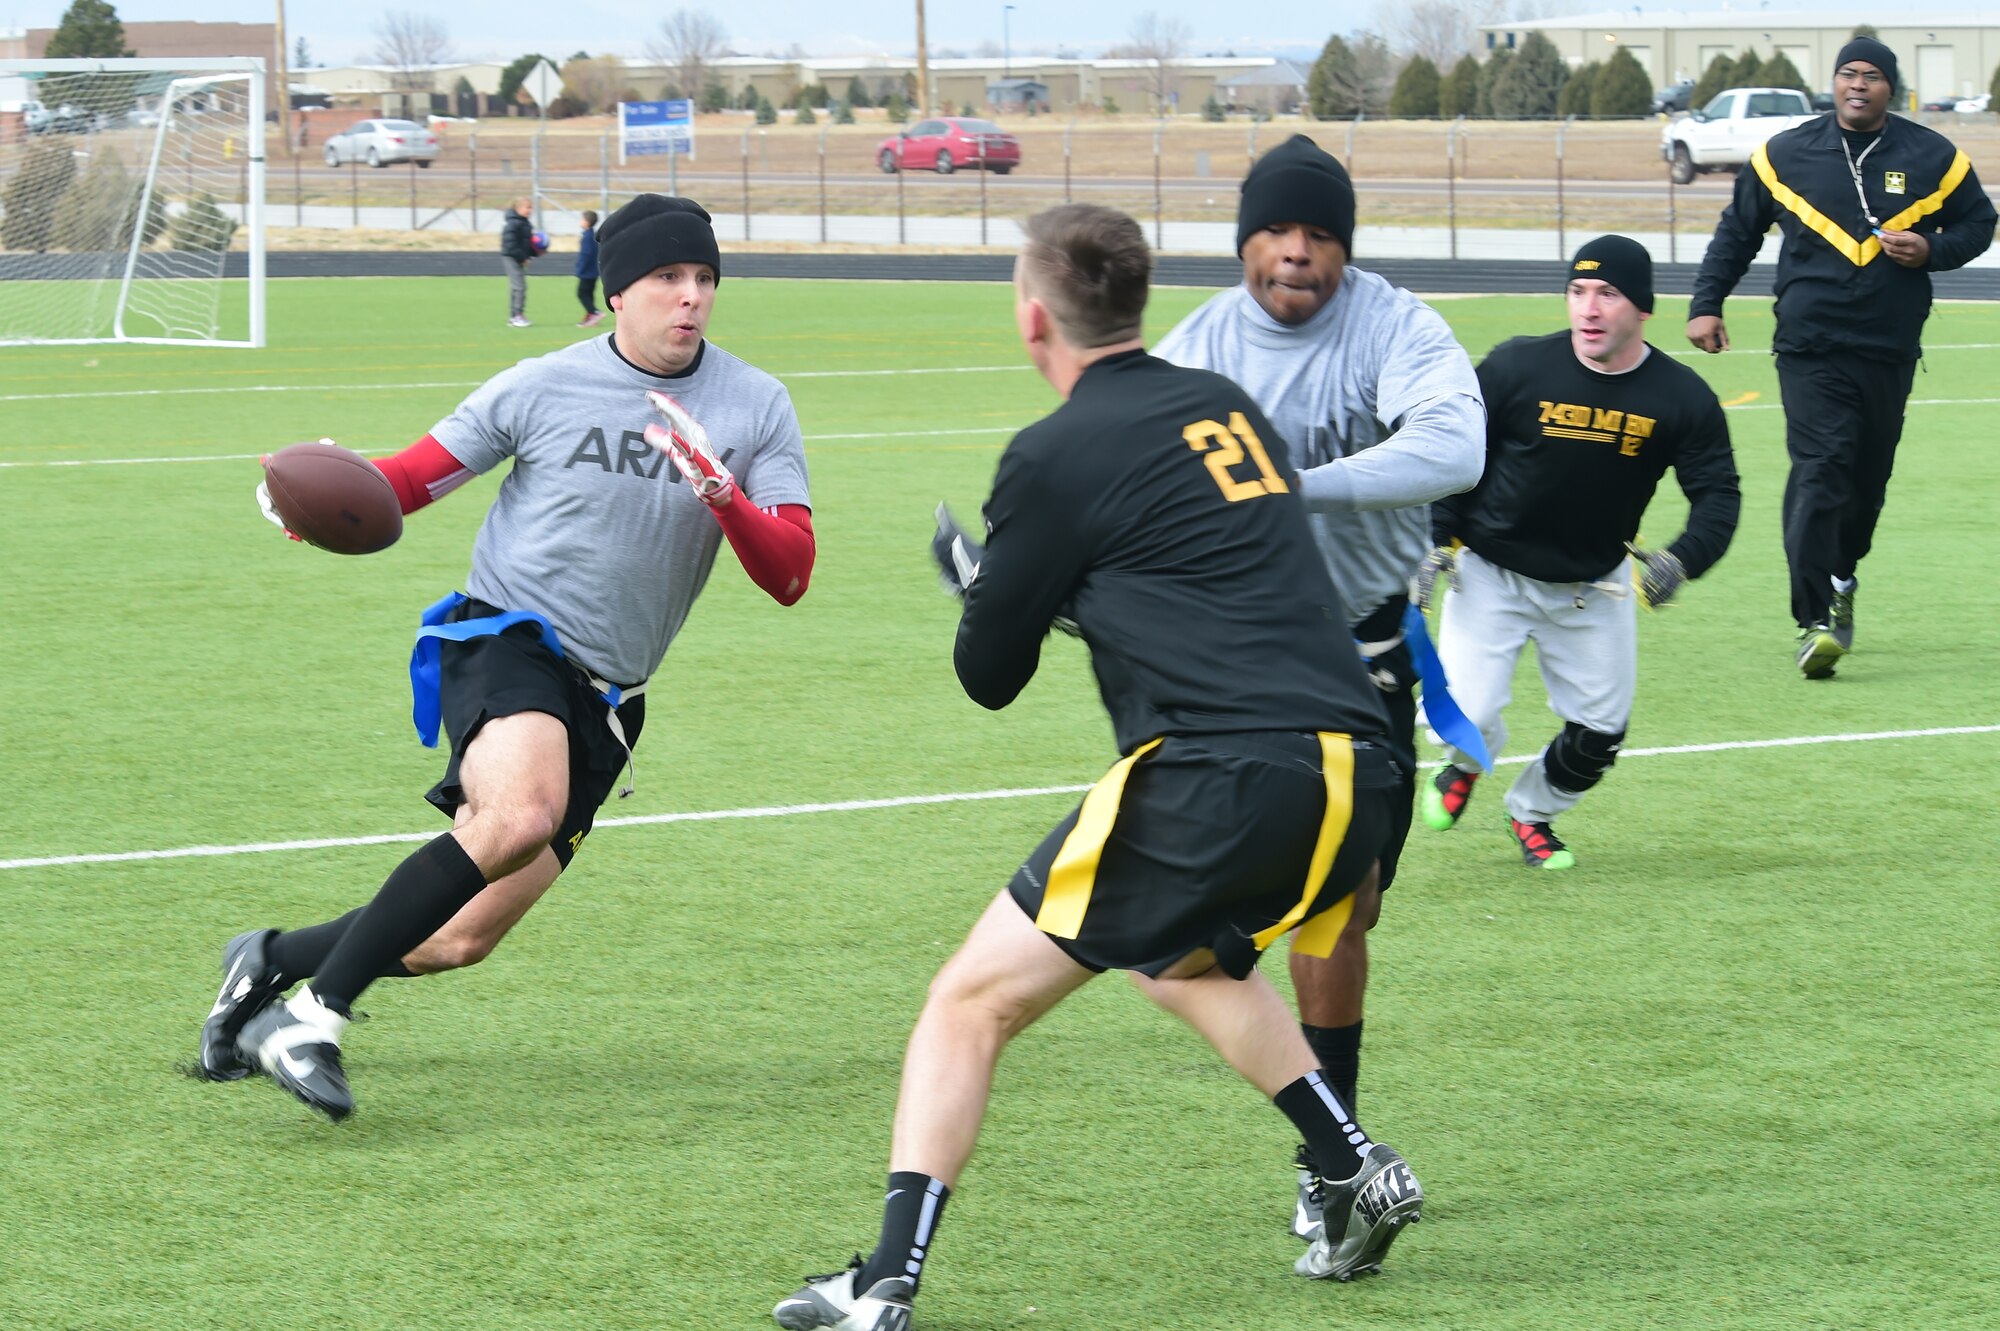 A member of the 743rd Military Intelligence Battalion senior NCOs team makes a cut to avoid a defender Nov. 25, 2015, on Buckley Air Force Base, Colo. The final outcome of the annual 743rd MI Battalion Turkey Bowl game was 24 to 18 with the officers walking away with the victory. (U.S. Air Force photo by Airman 1st Class Luke W. Nowakowski/Released)